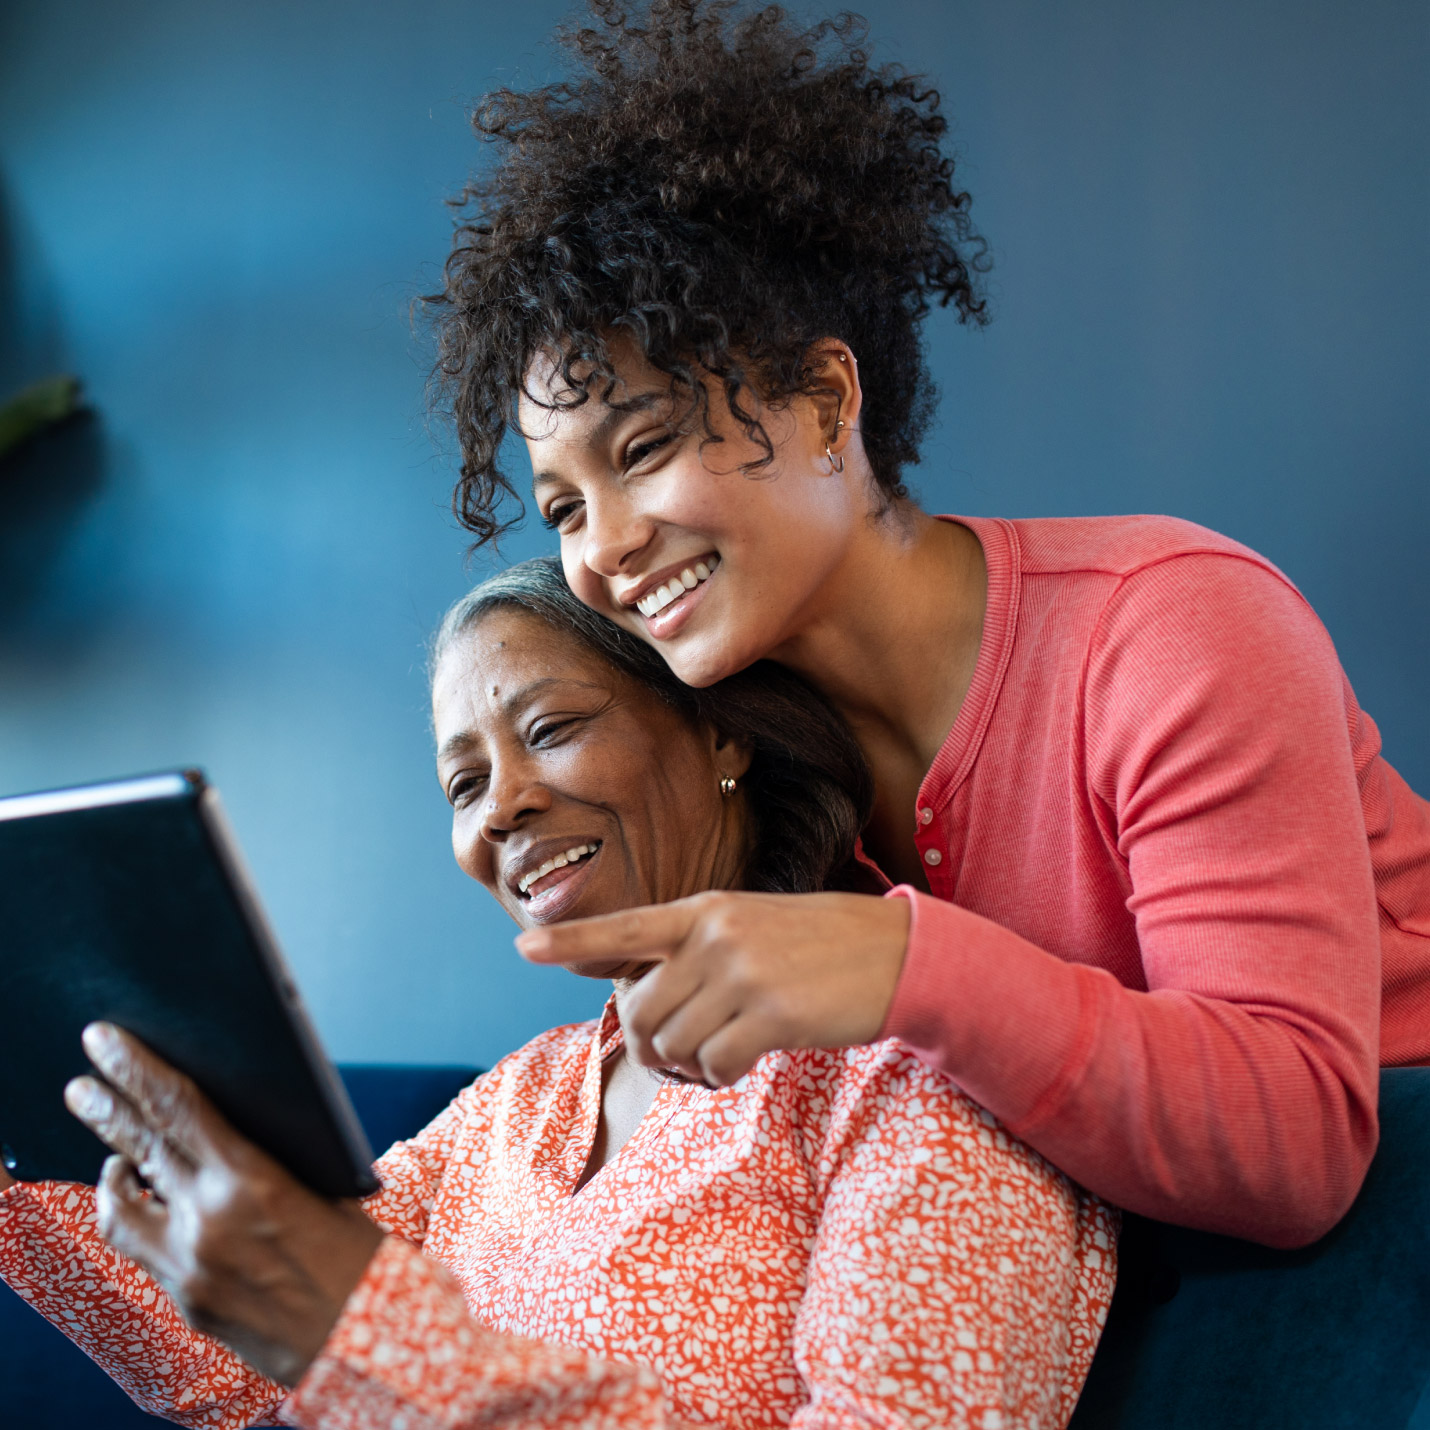 Smiling adult woman behind her mother pointing at an iPad screen her mother is holding